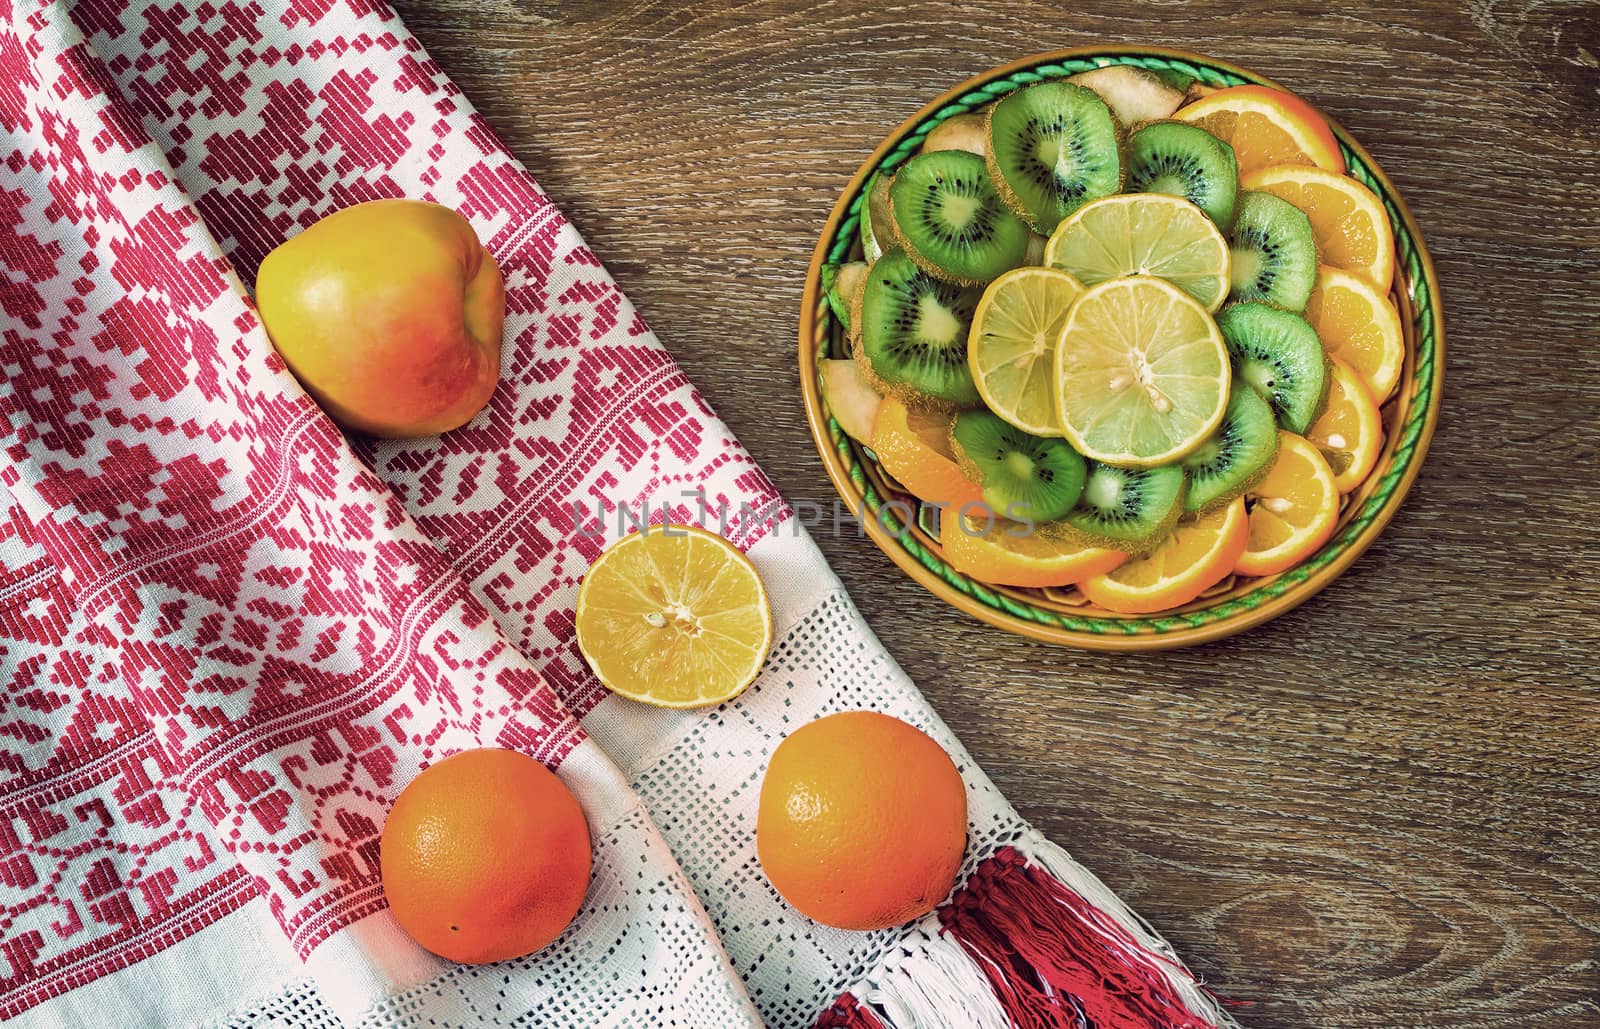 On the table is a dish of sliced fruits: oranges, kiwi, lemon. Near them on a beautiful towel are two oranges and an Apple.